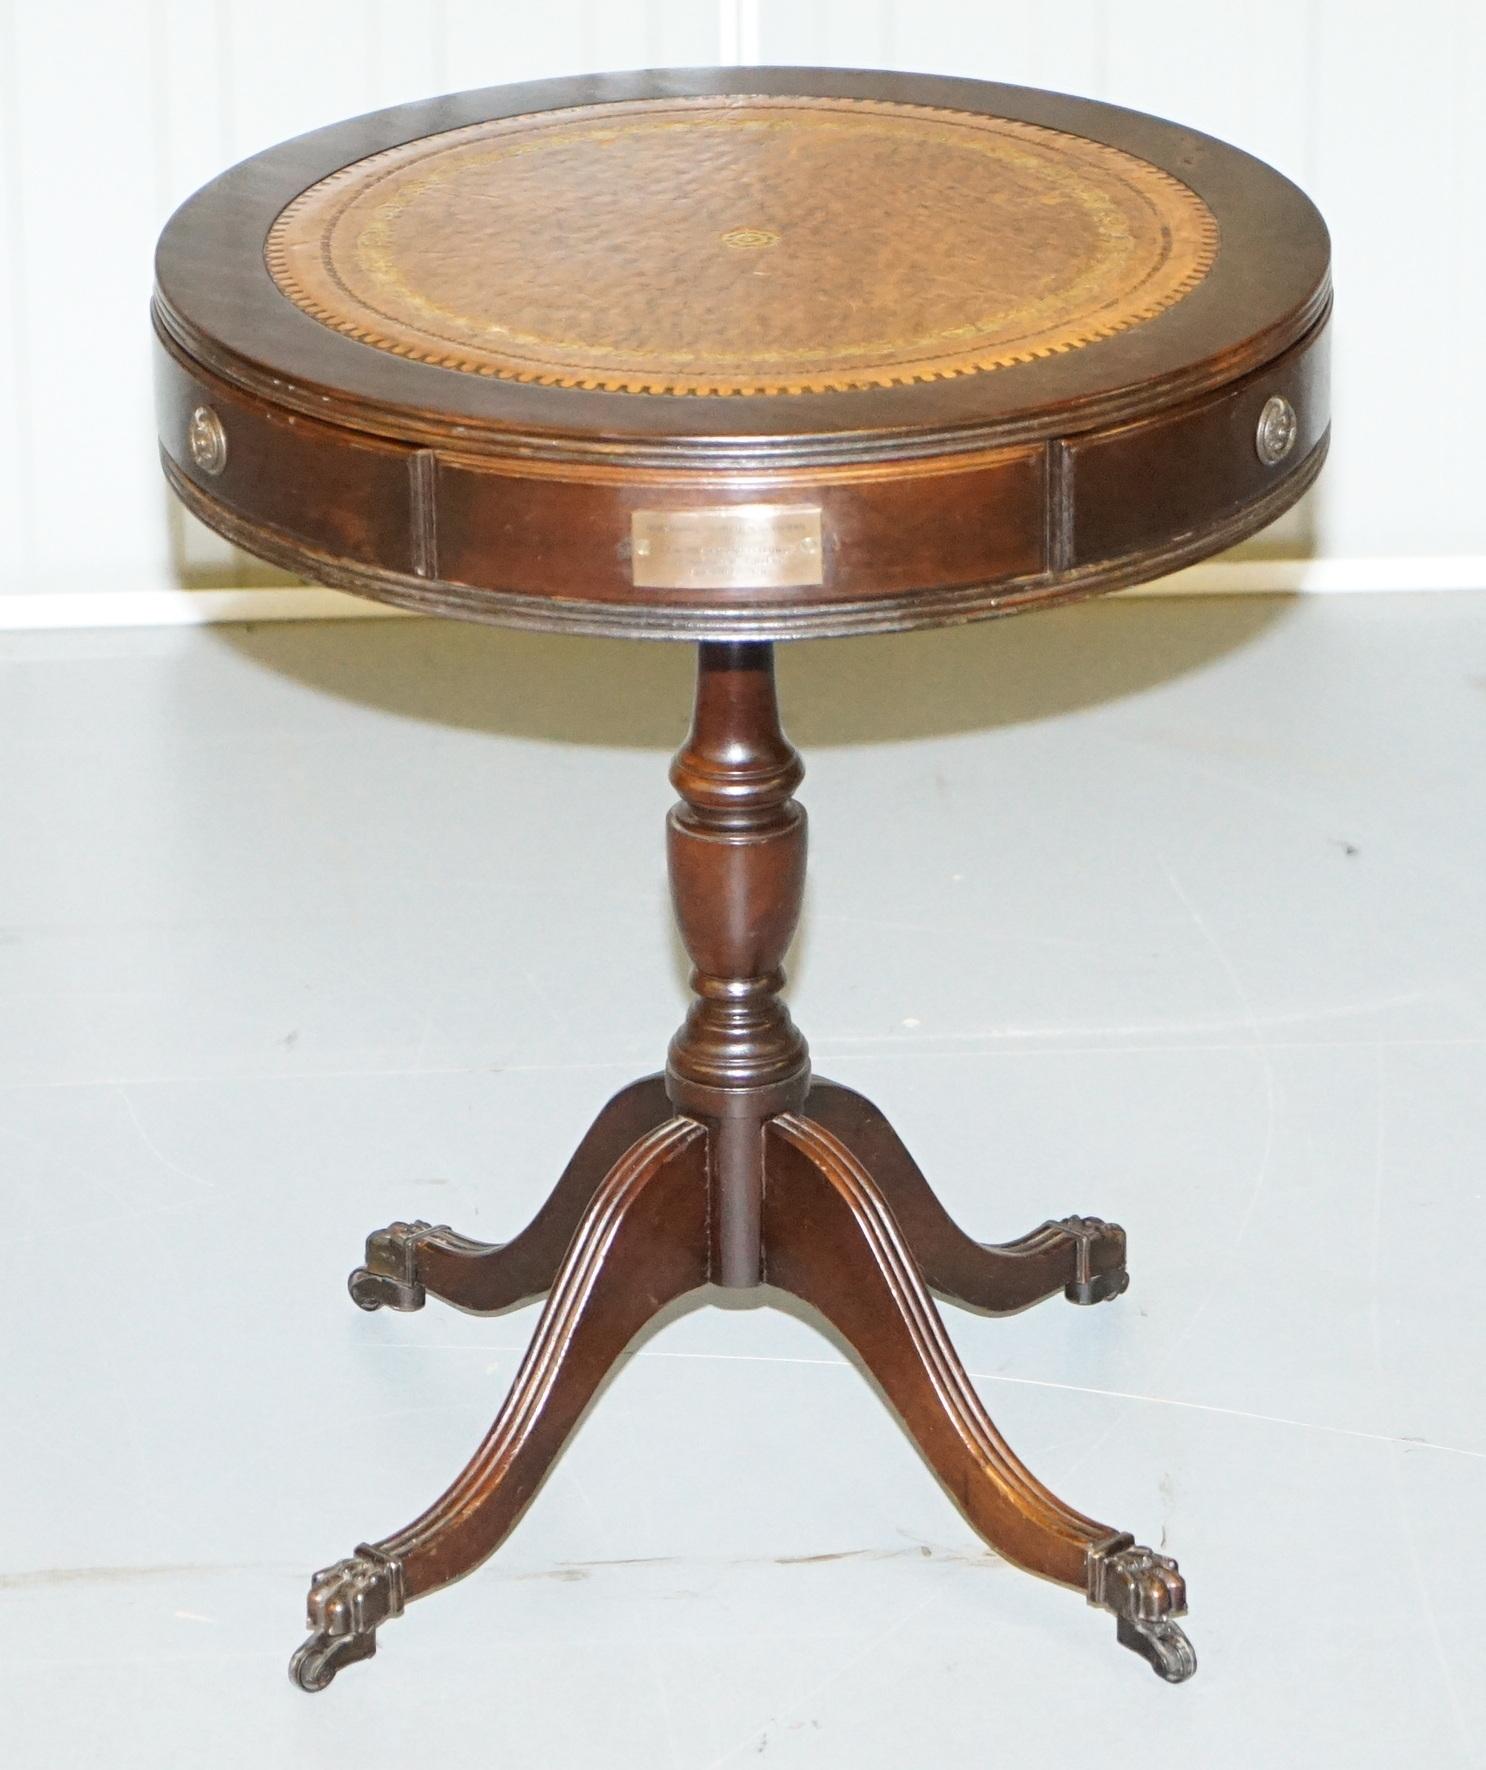 We are delighted to offer for sale this lovely Regency style mahogany drum table with leather top three drawers and a bronze plaque 

A good looking piece, the leather top has nicely aged, it has gold leaf embossing, there is a bronze plaque which